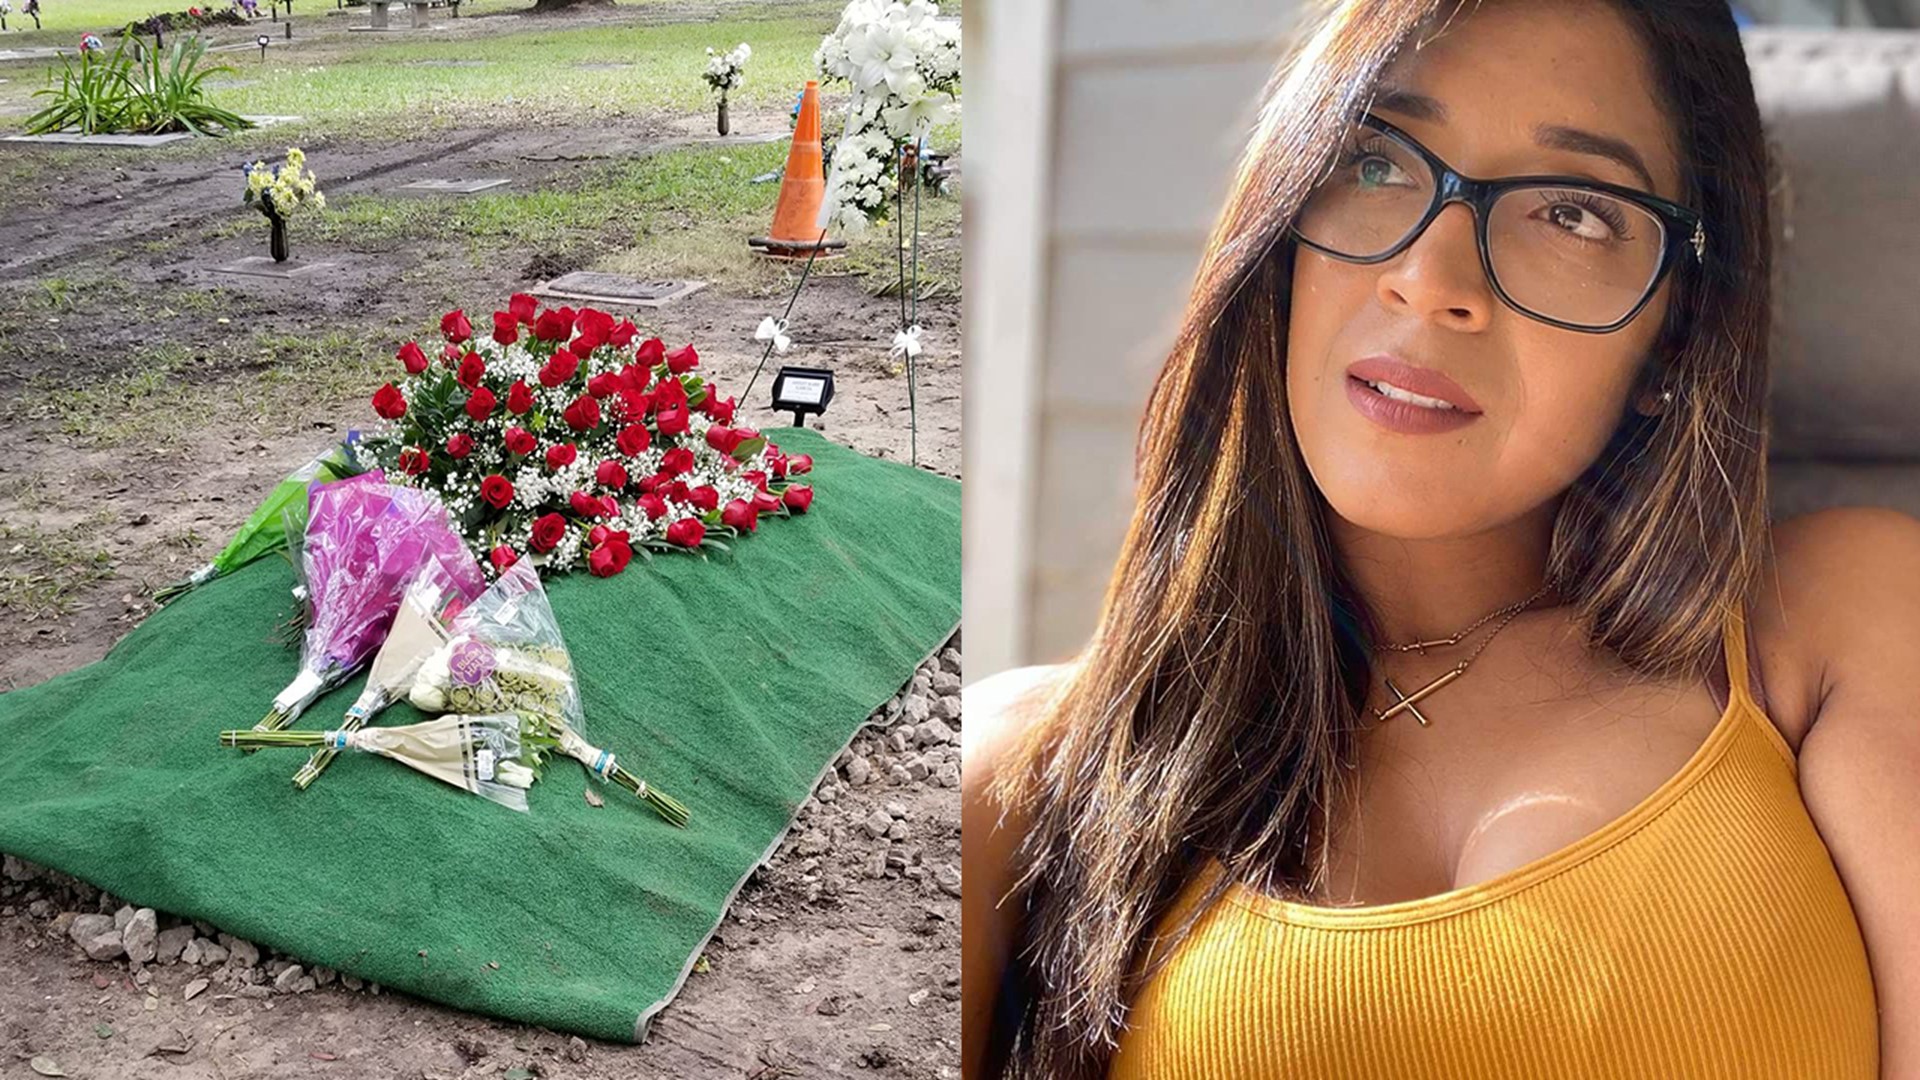 Police said Ashley Garcia was beaten to death by her boyfriend, Alexis Armando Rojas-Mendez. Garcia's son may have witnessed the crime, according to investigators.